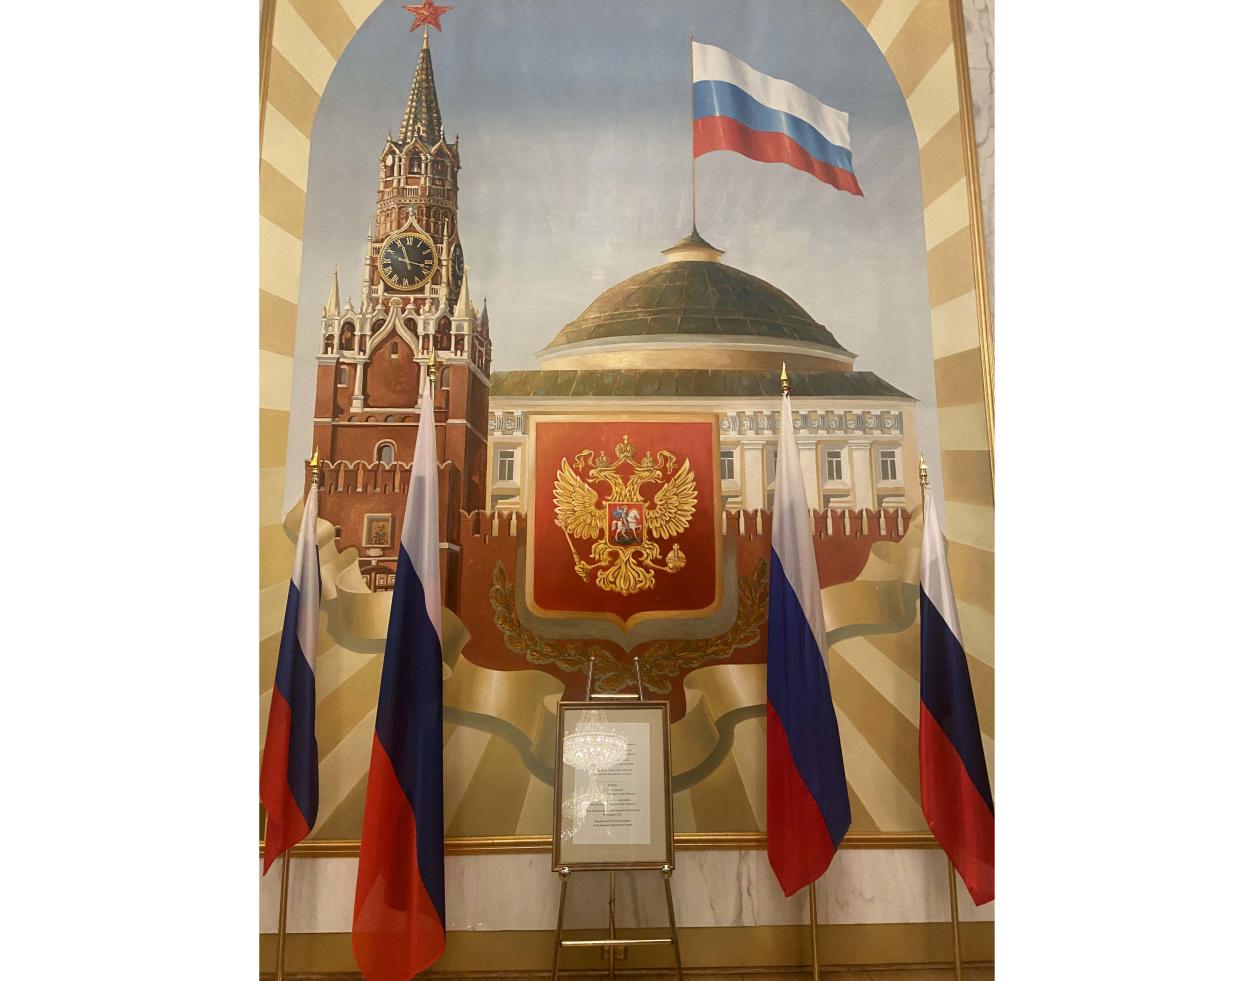 A mural depicting Russian symbols in the embassy during the party.